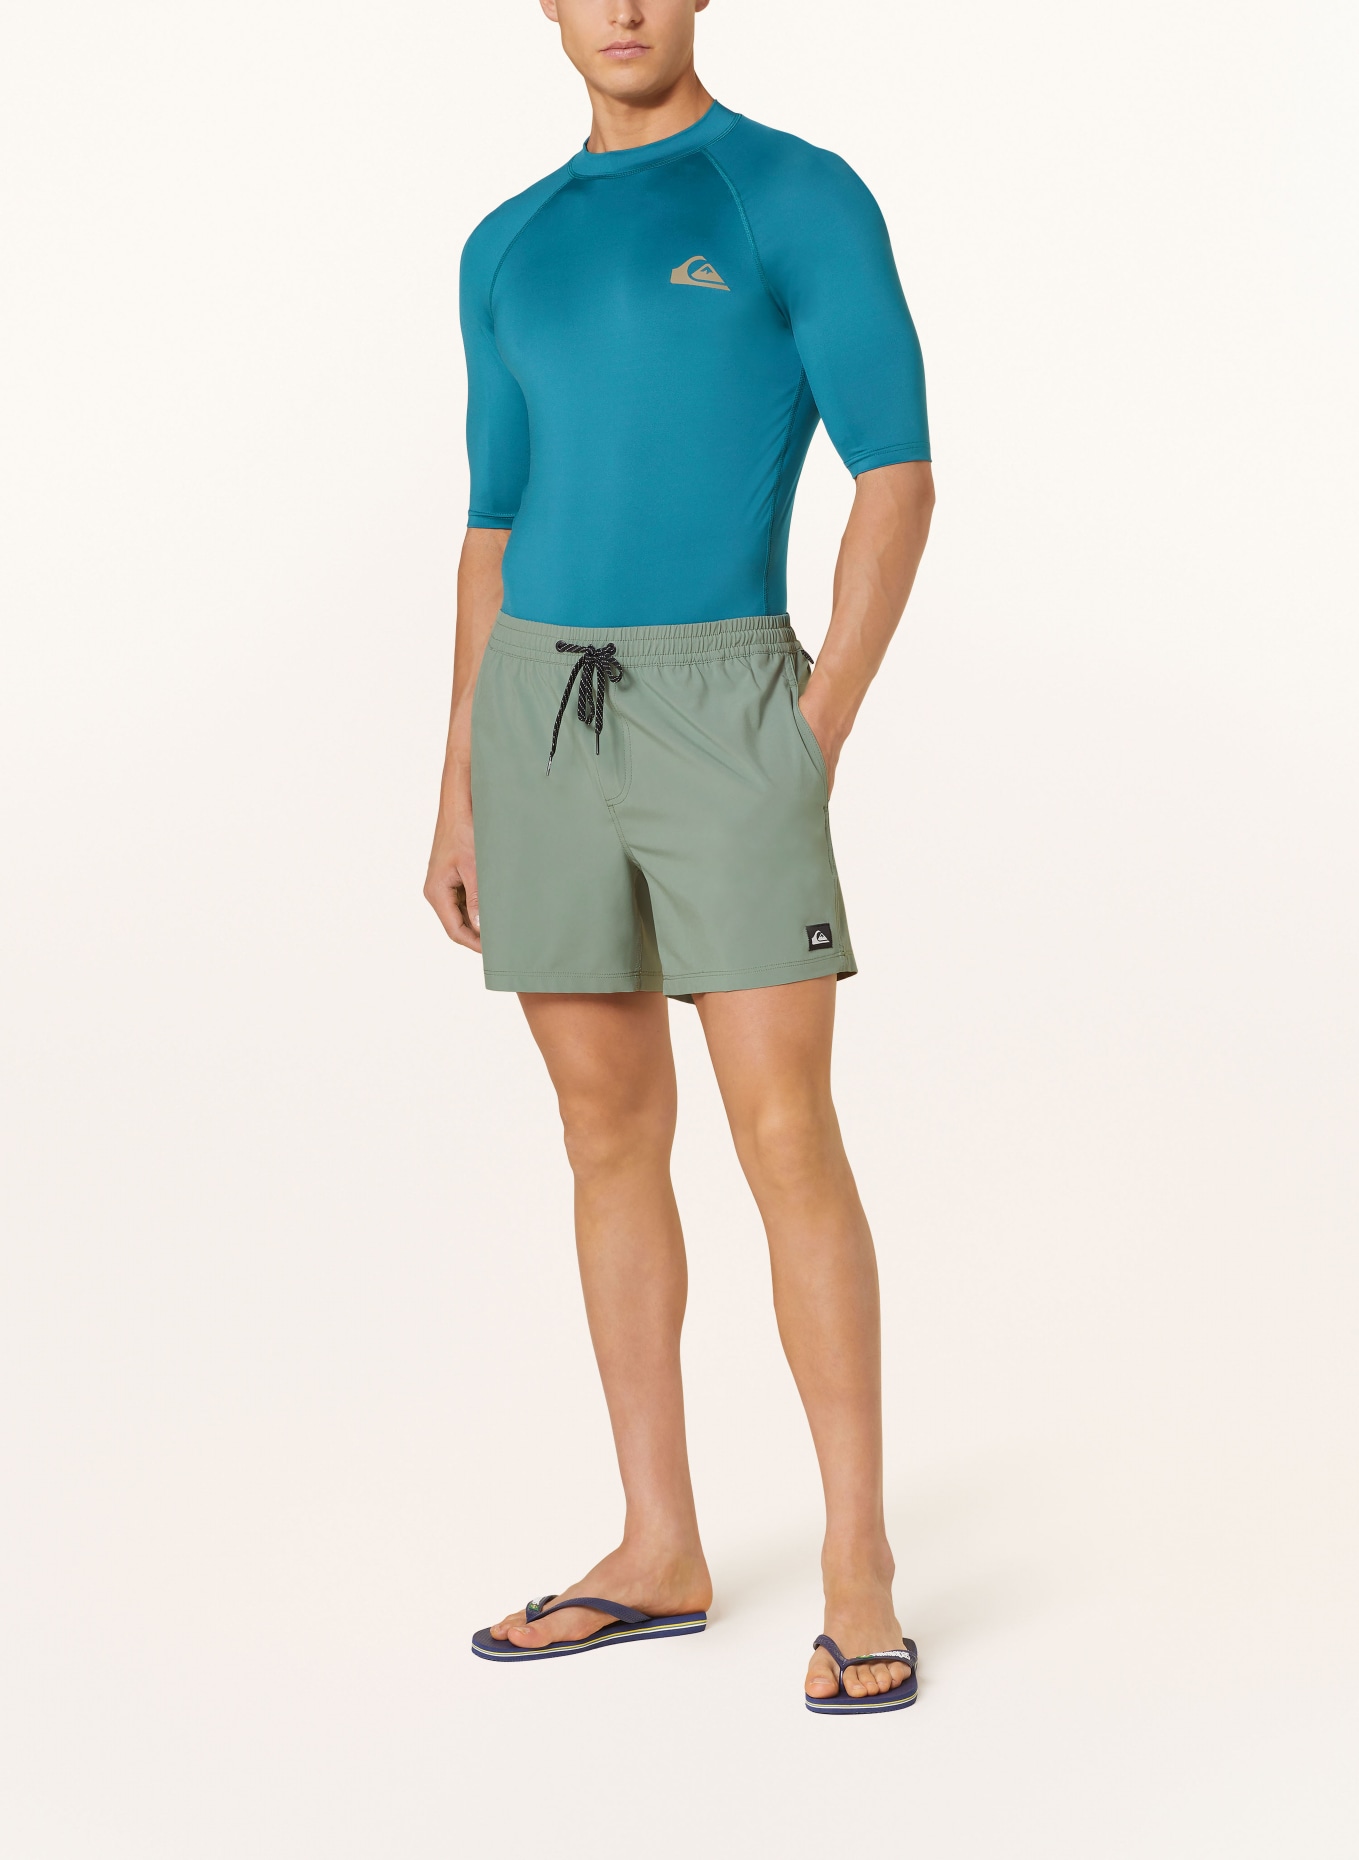 QUIKSILVER T-shirt EVERYDAY with UV protection, Color: TEAL (Image 2)